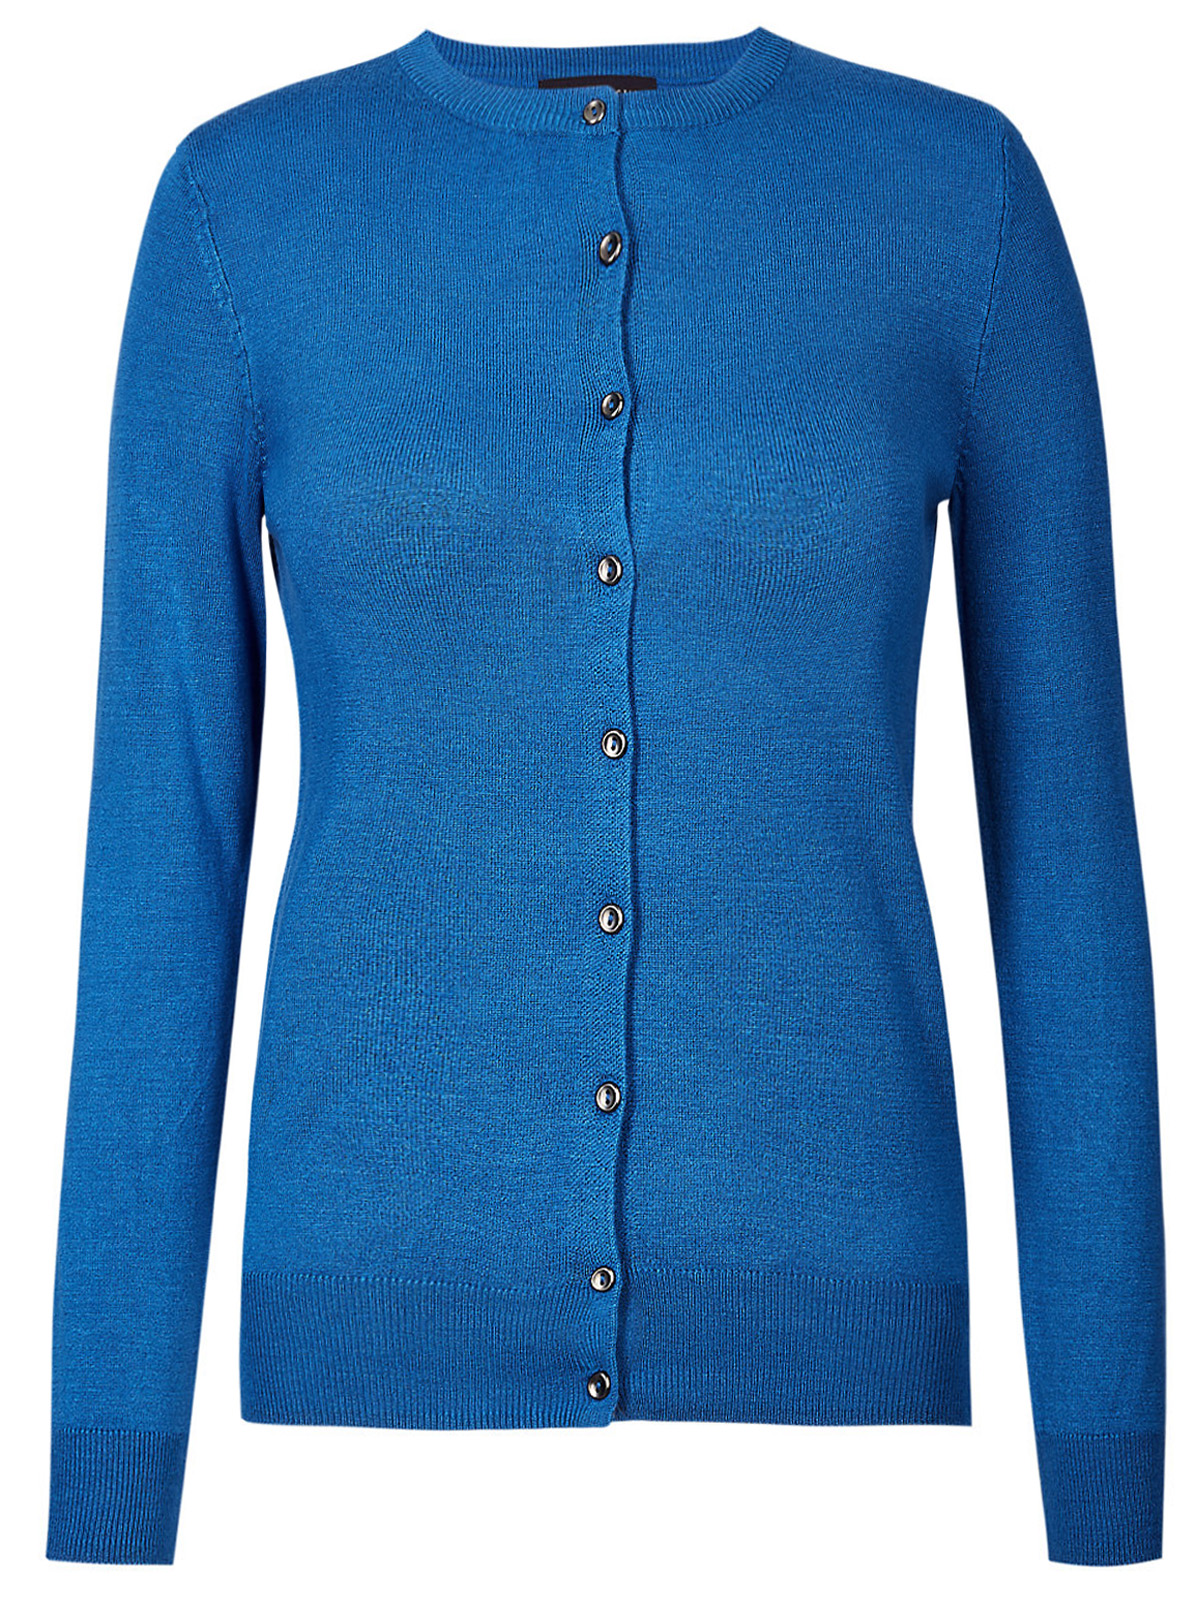 Marks and Spencer - - M&5 BRIGHT-BLUE Round Neck Button Through ...